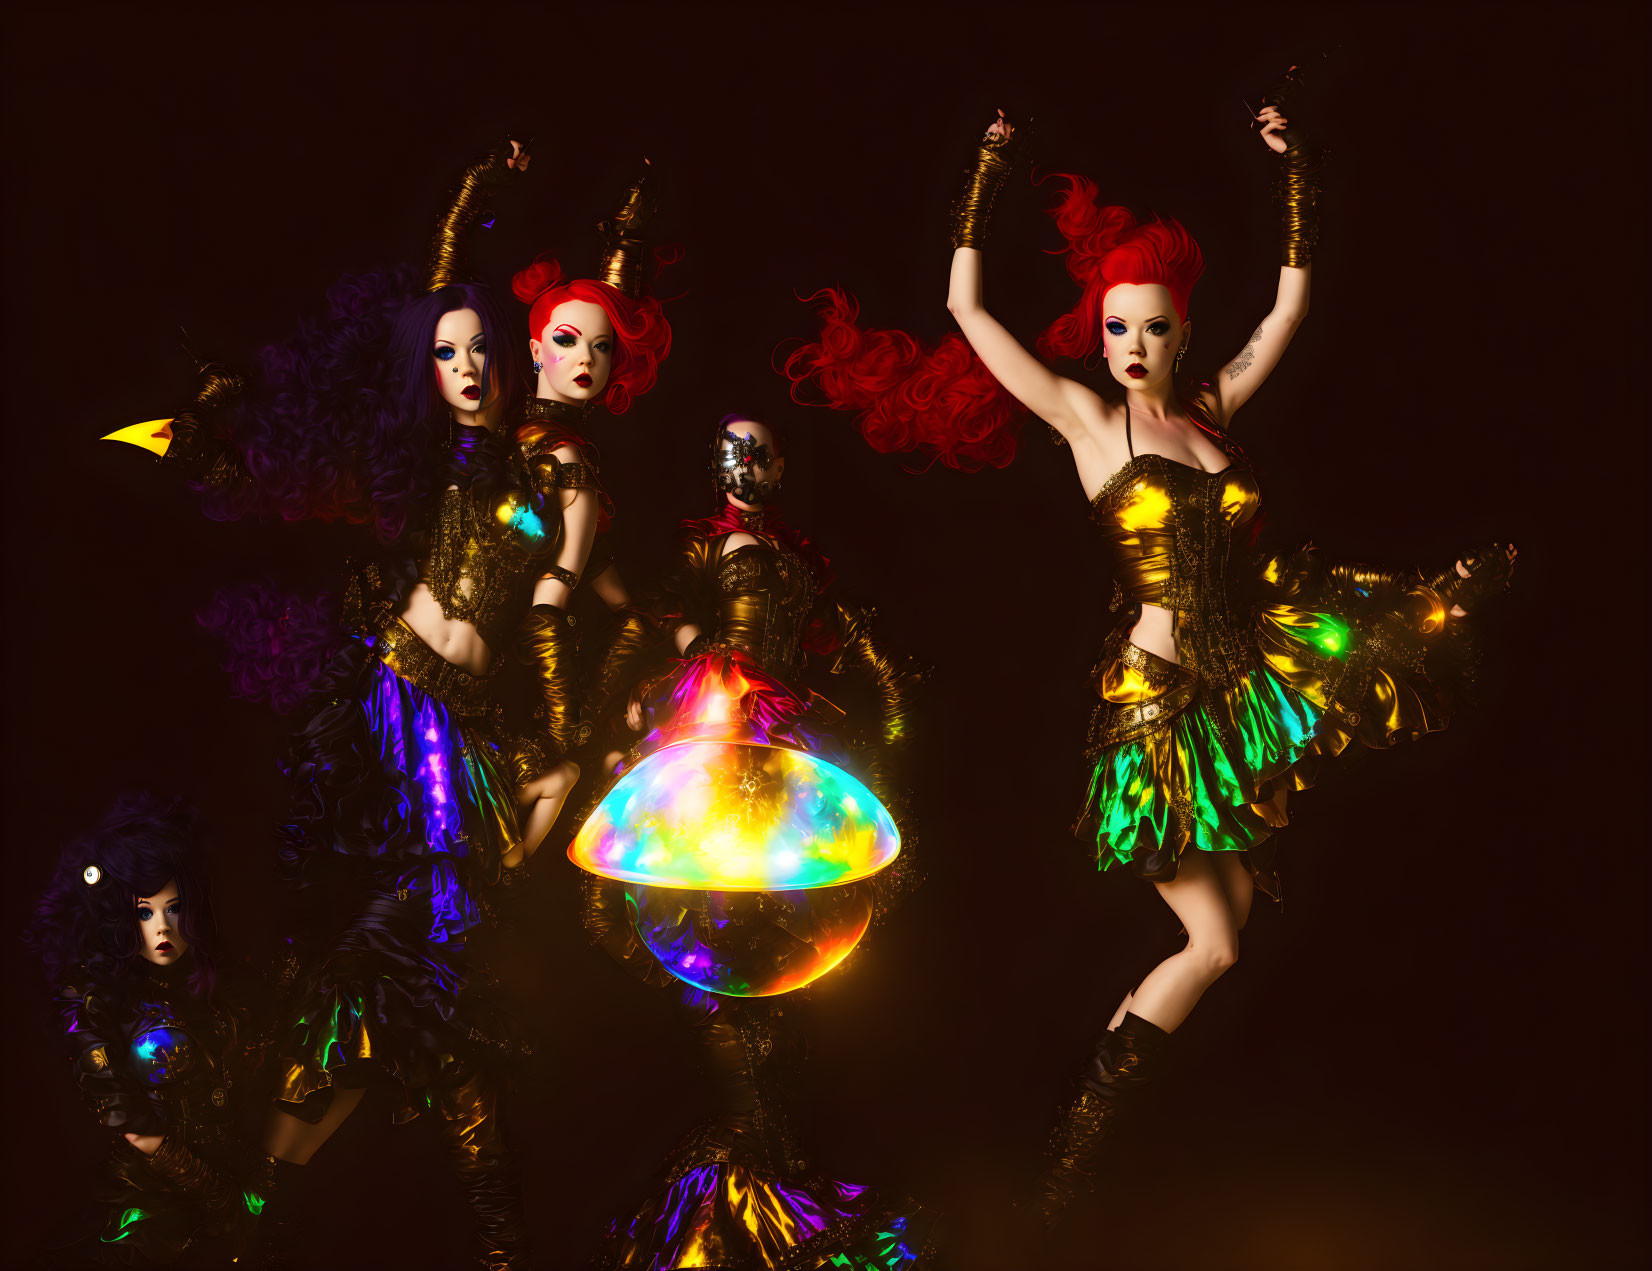 Four futuristic models in vibrant metallic costumes and exaggerated red hairstyles on dark background